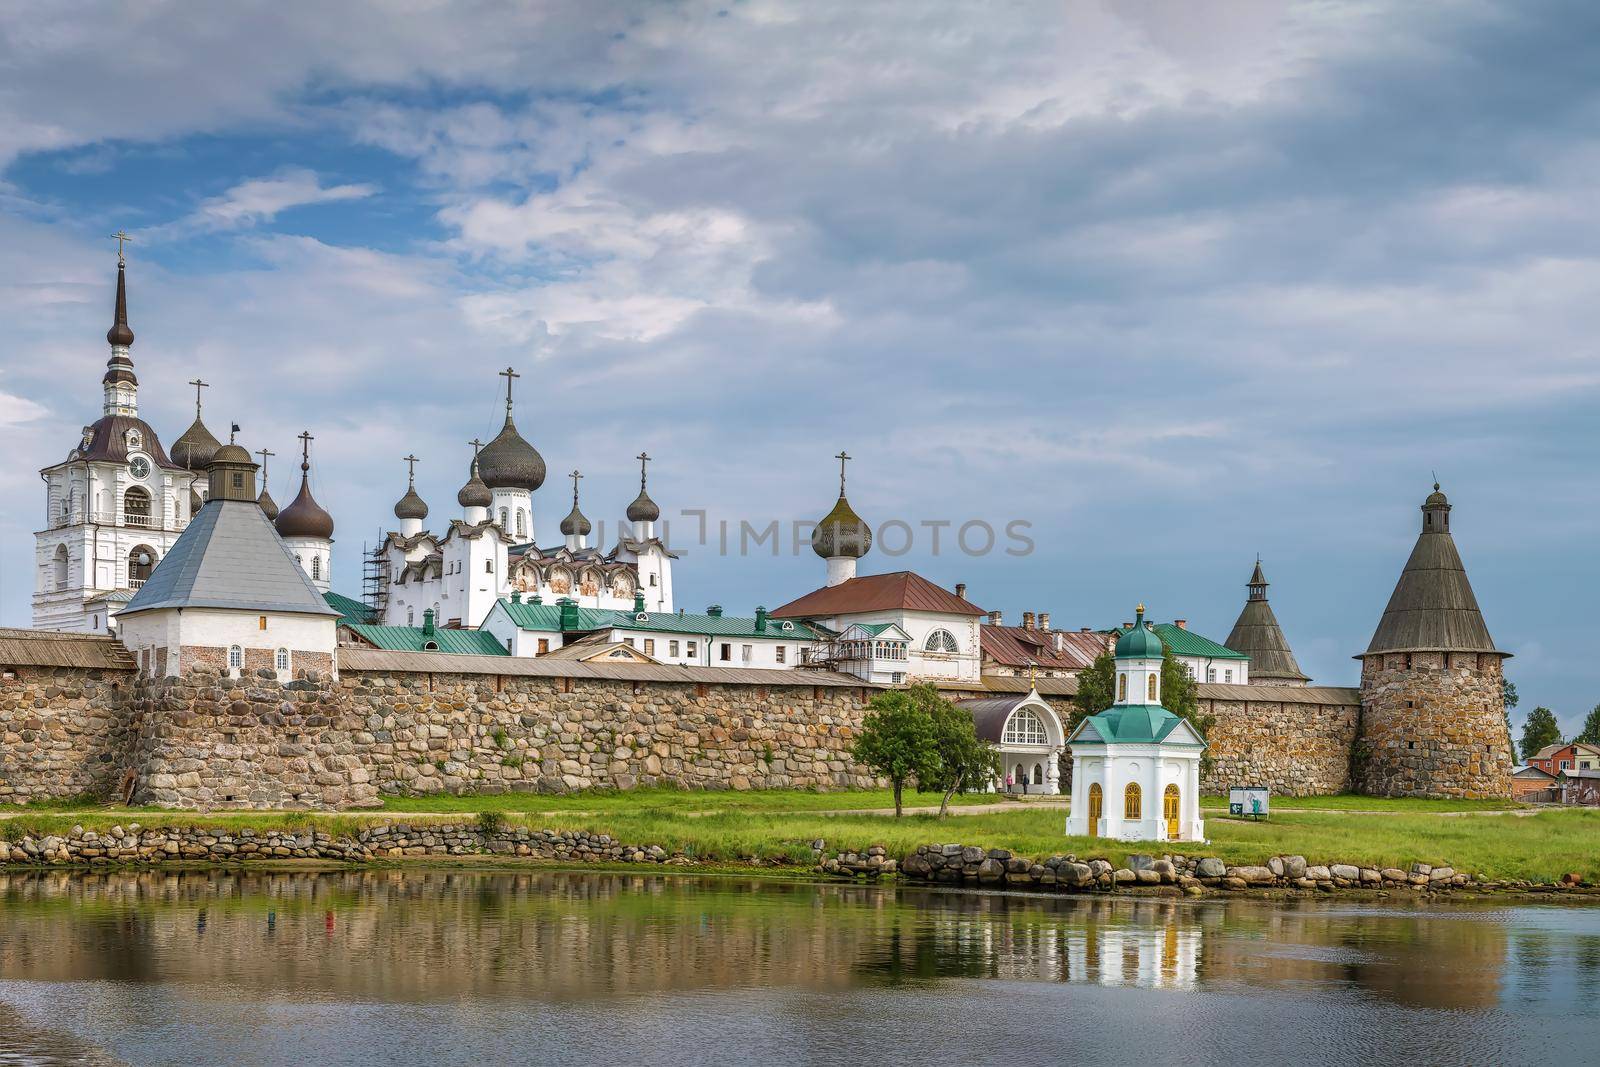 Solovetsky Monastery is a fortified monastery located on the Solovetsky Islands in the White Sea, Russia. View from White sea